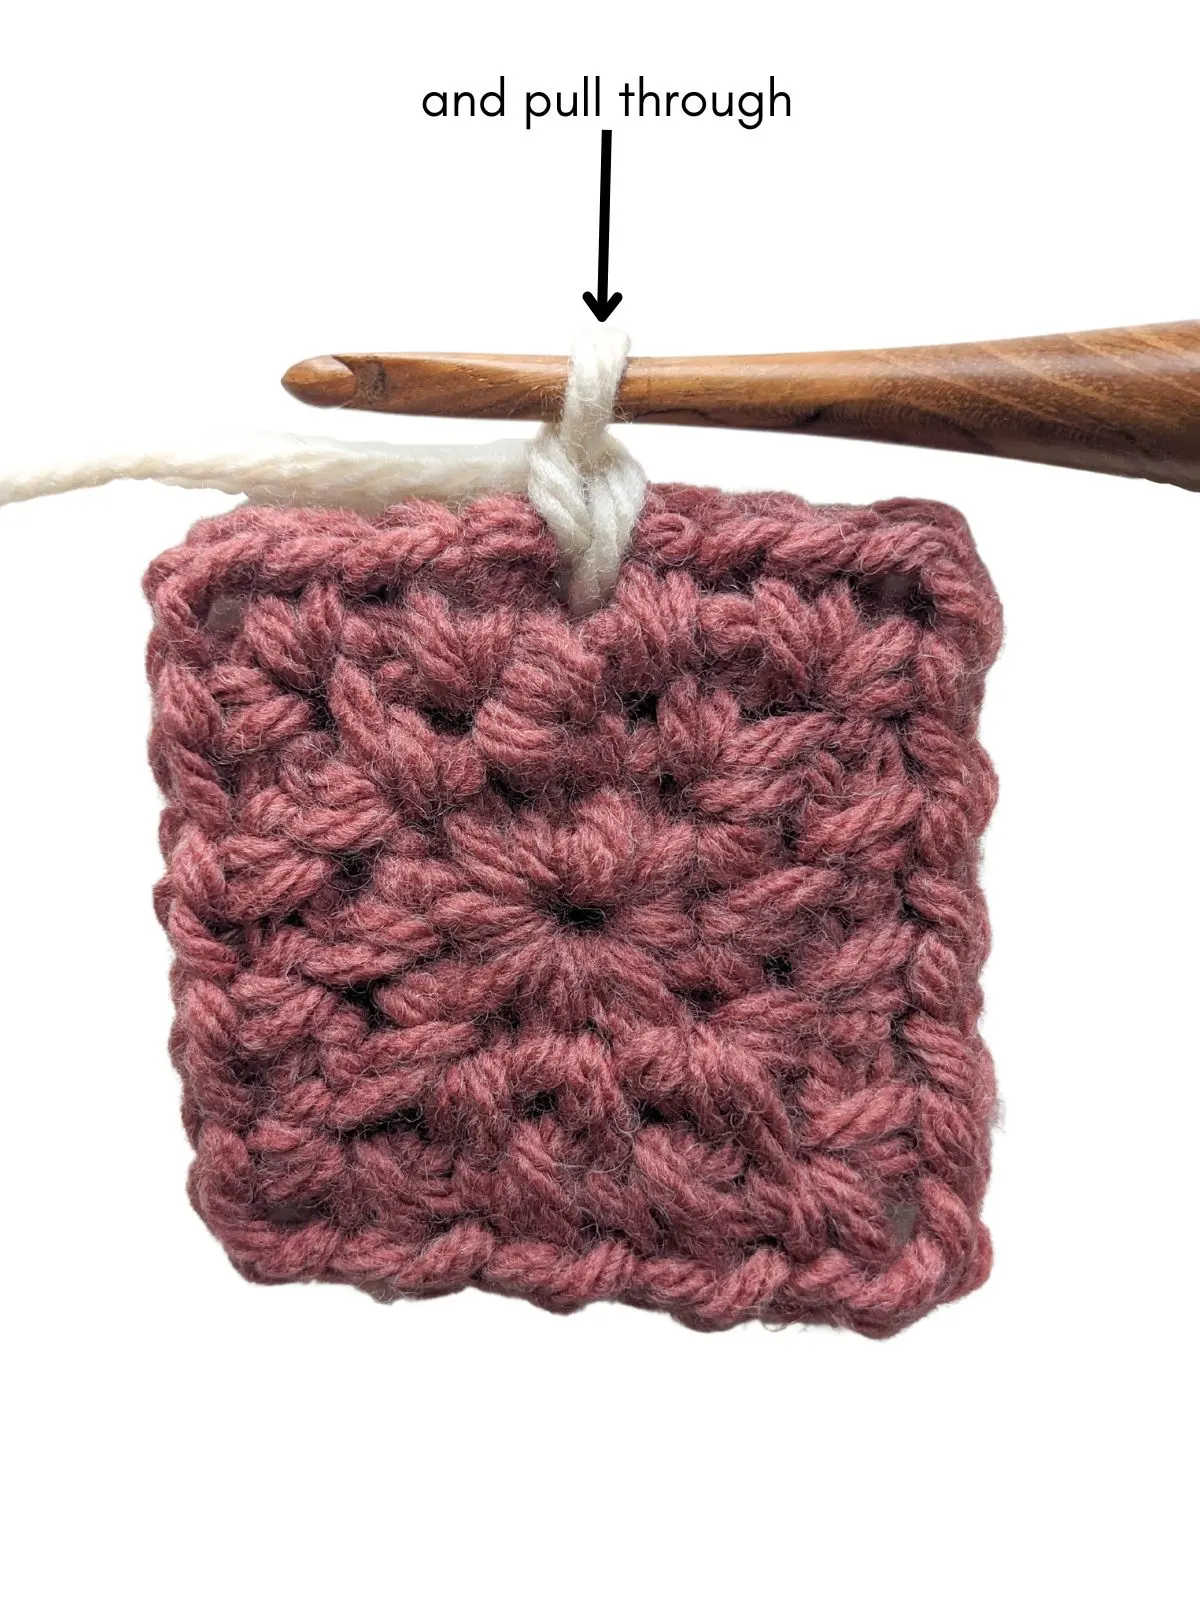 A completed single crochet stitch on a moss stitch square. 